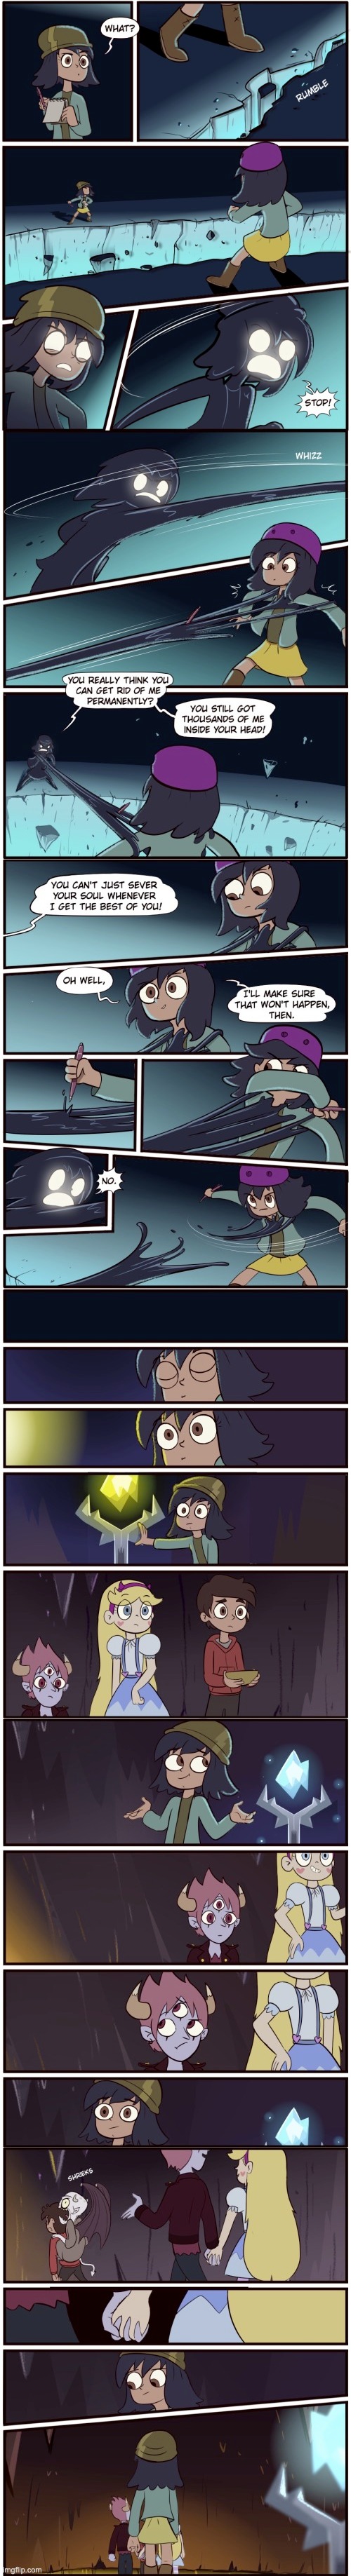 Tom vs Jannanigans: Happily Sever’d After (Part 6) | image tagged in svtfoe,morningmark,comics/cartoons,star vs the forces of evil,comics,memes | made w/ Imgflip meme maker